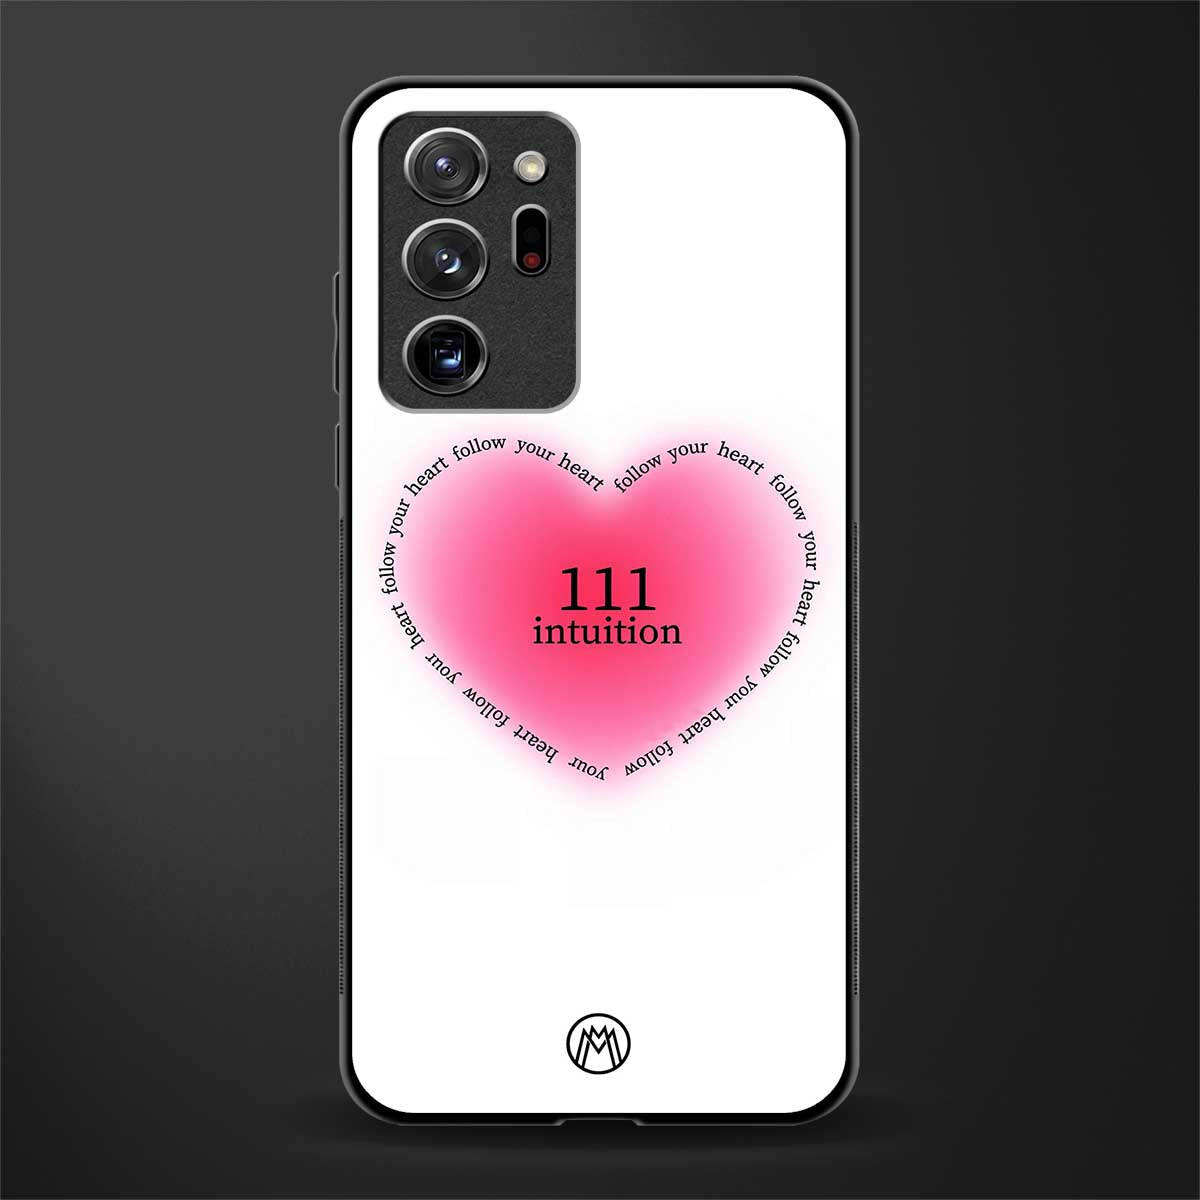 111 intuition glass case for samsung galaxy note 20 ultra 5g image